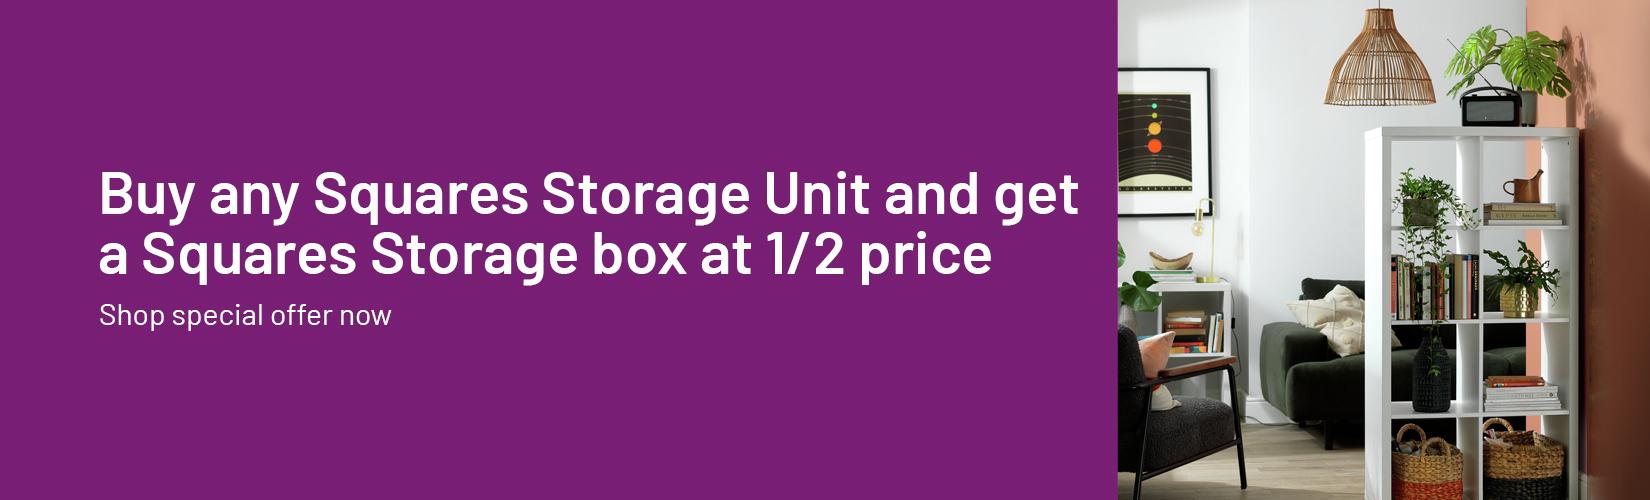 Buy any squares storage unit and get a squares storage box 1/2 price.